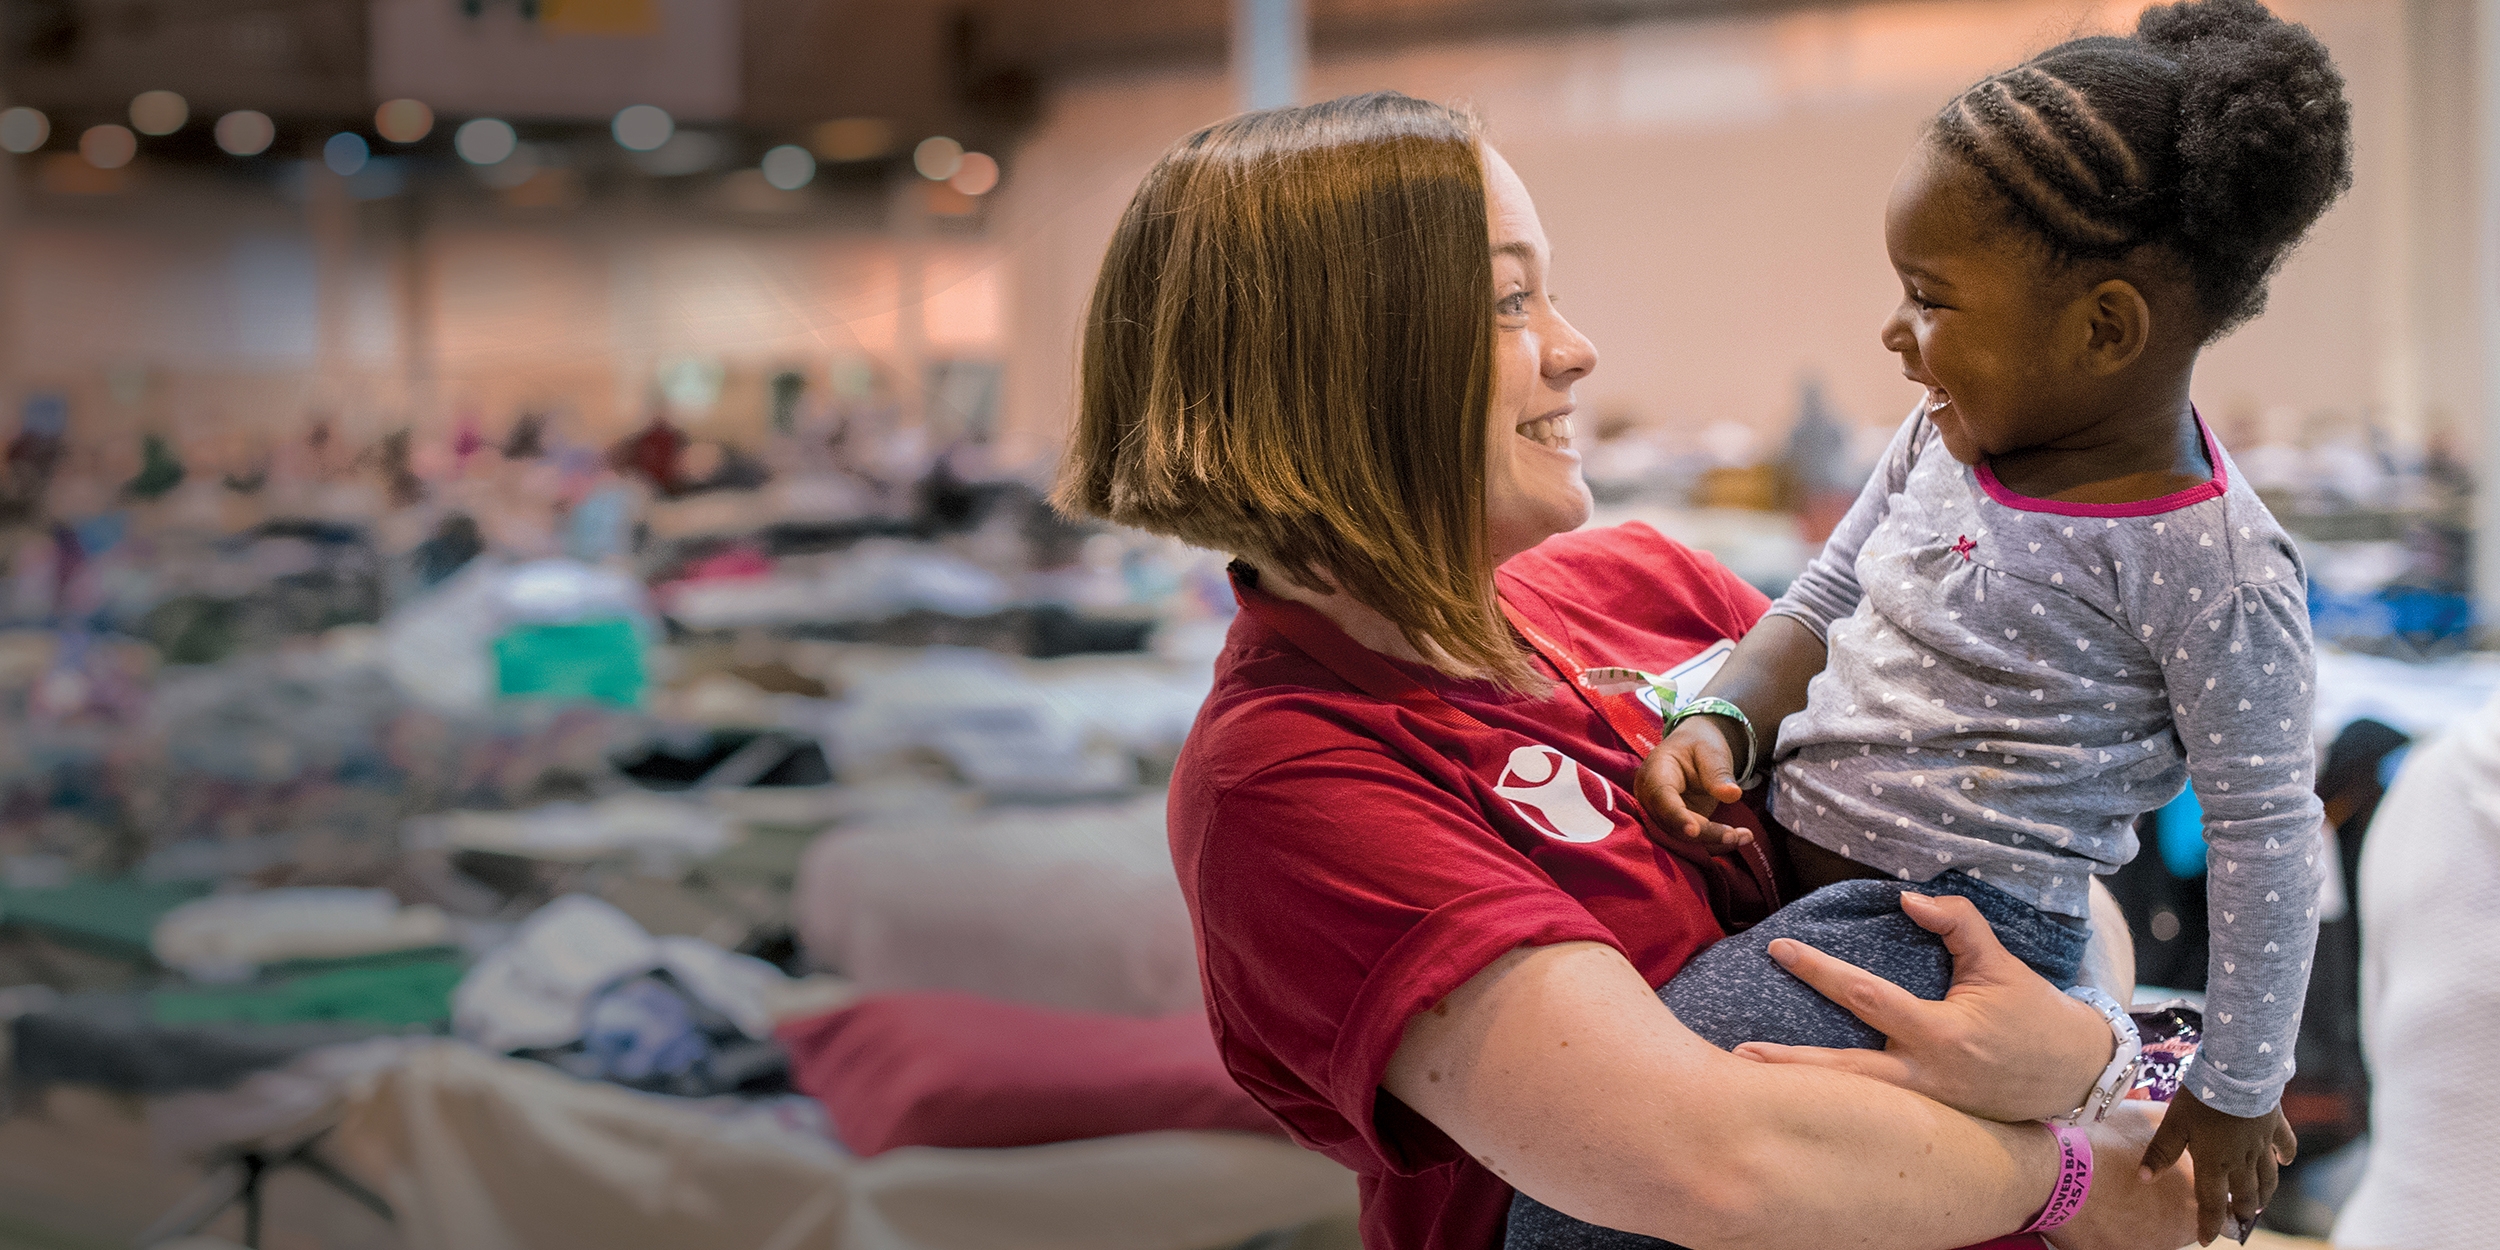 Erin, a Save the Children staff member, smiles at a 2-year old girl in a mega-shelter in Houston. Save the Children distributed cribs and other essentials to families in Texas in the aftermath of Hurricane Harvey. Photo credit: Susan Warner/Save the Children, September 2017.